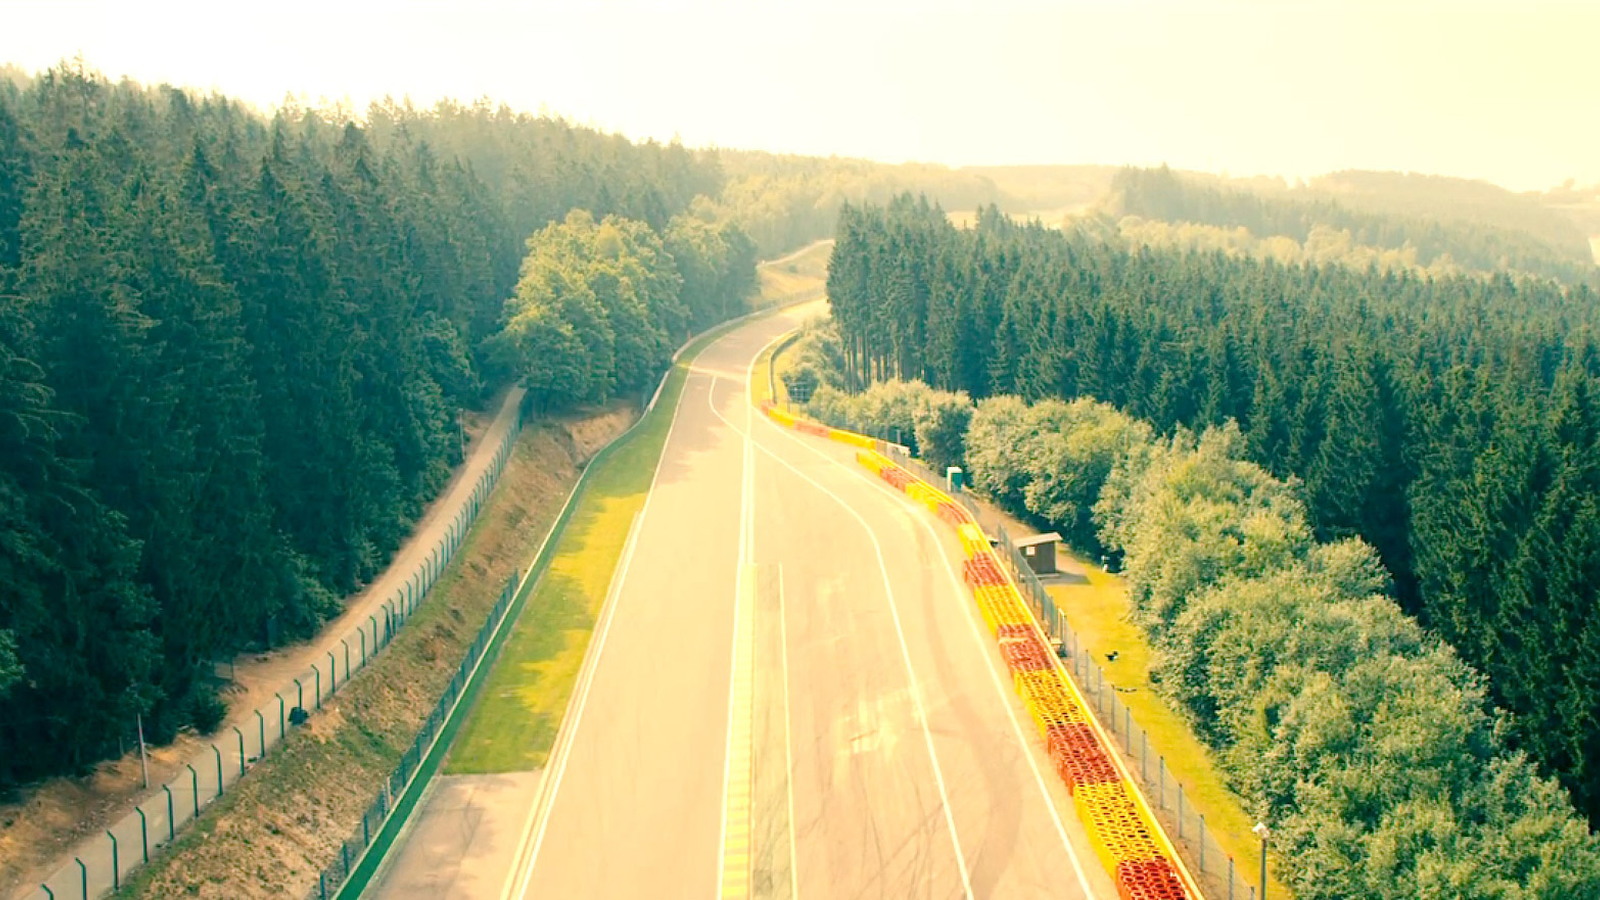 Spa-Francorchamps, home of the Formula 1 Belgian Grand Prix